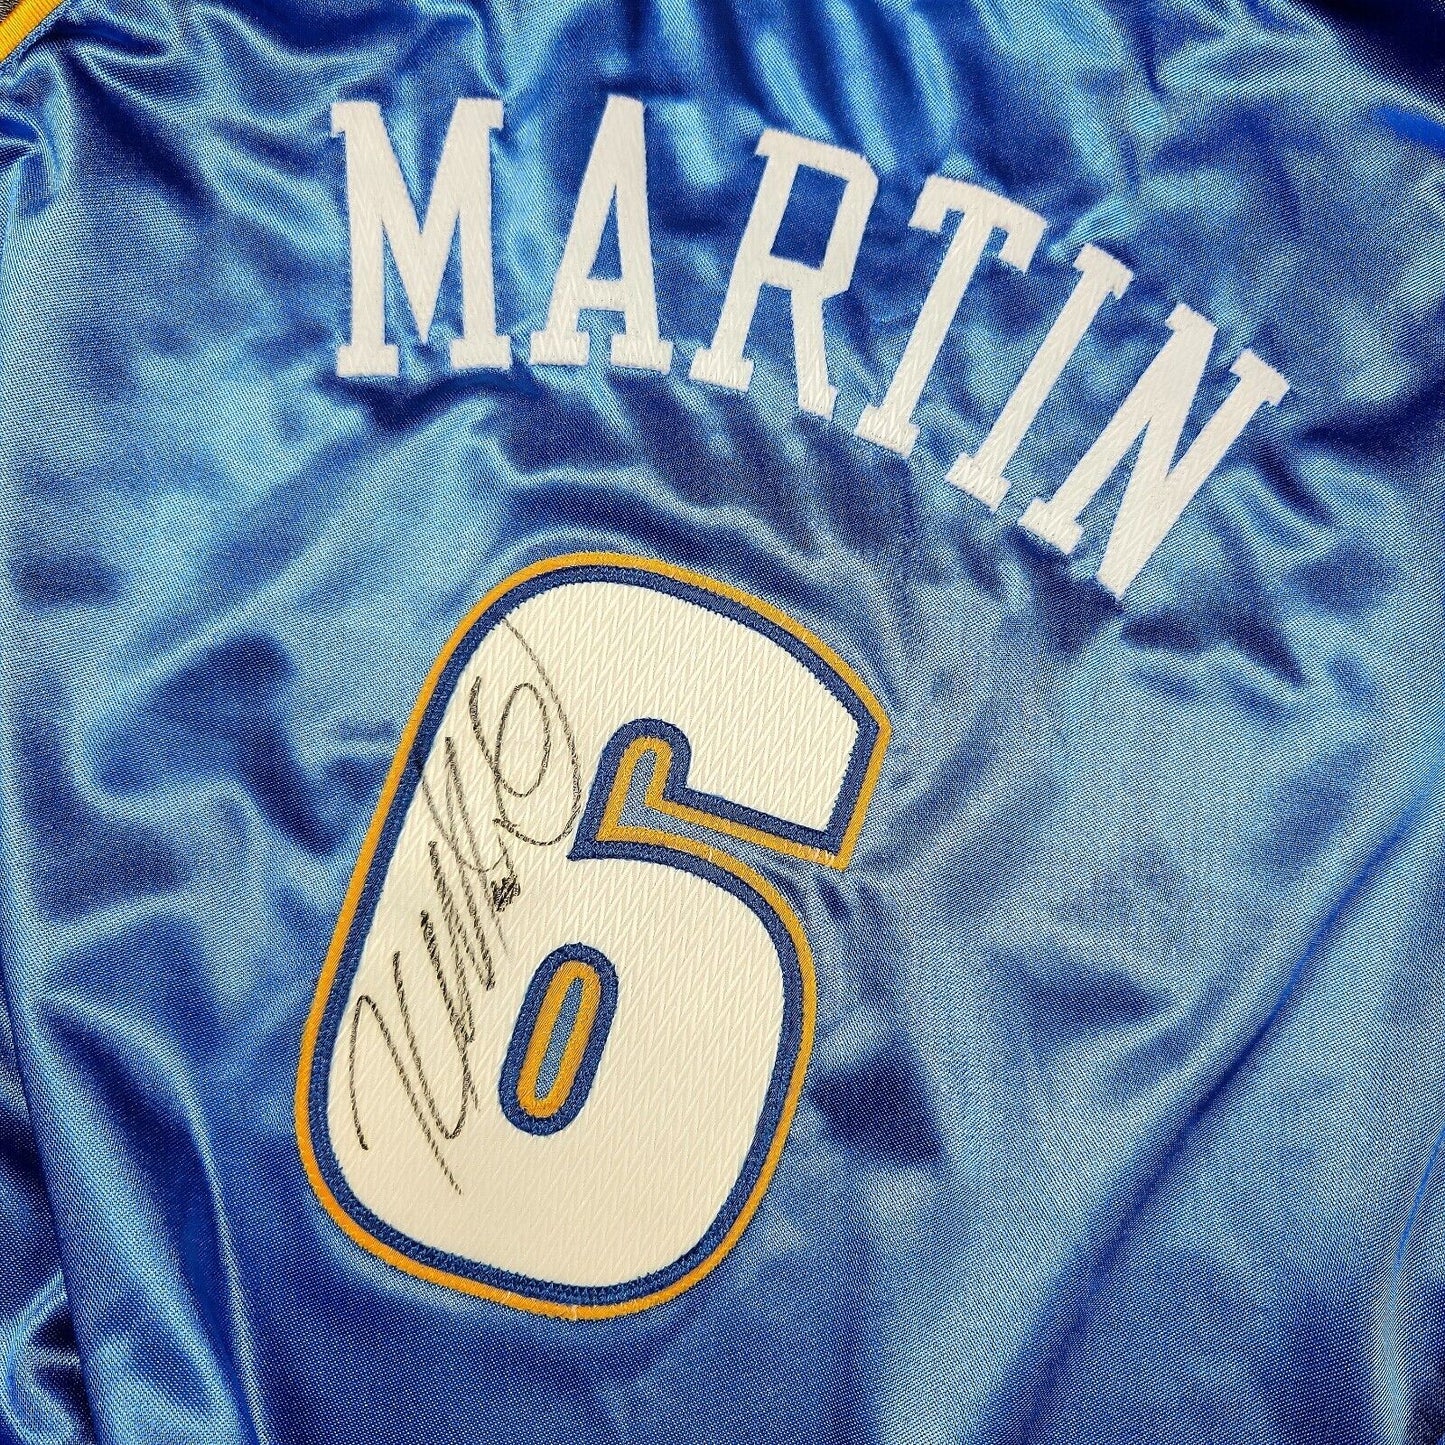 100% Authentic Kenyon Martin Signed 2004 2005 Nuggets Pro Cut Game Jersey